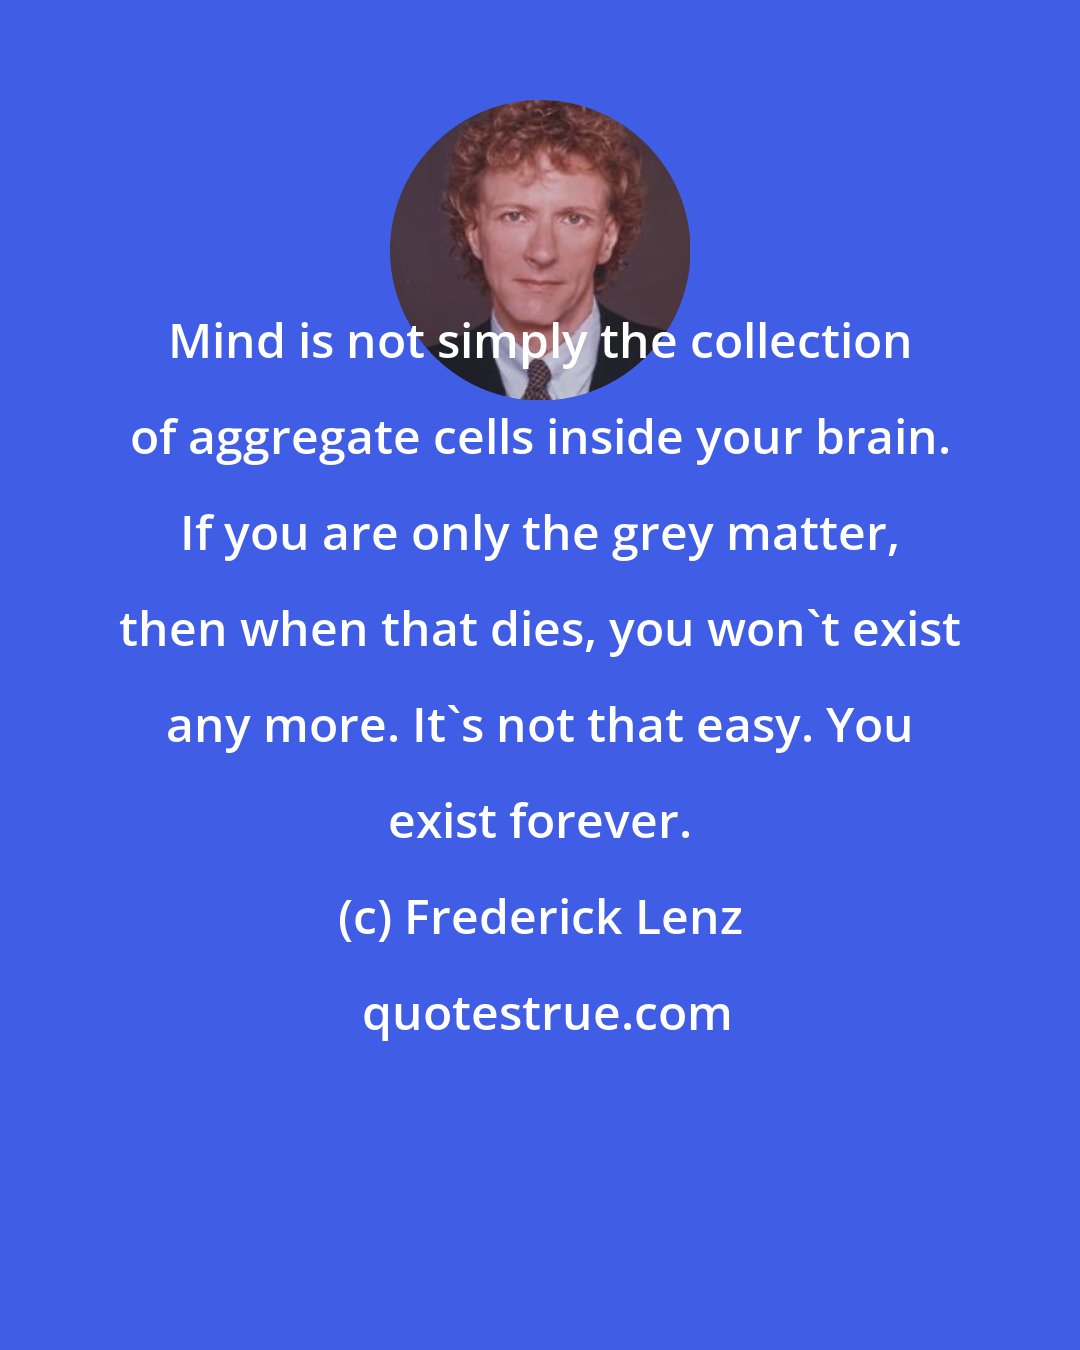 Frederick Lenz: Mind is not simply the collection of aggregate cells inside your brain. If you are only the grey matter, then when that dies, you won't exist any more. It's not that easy. You exist forever.